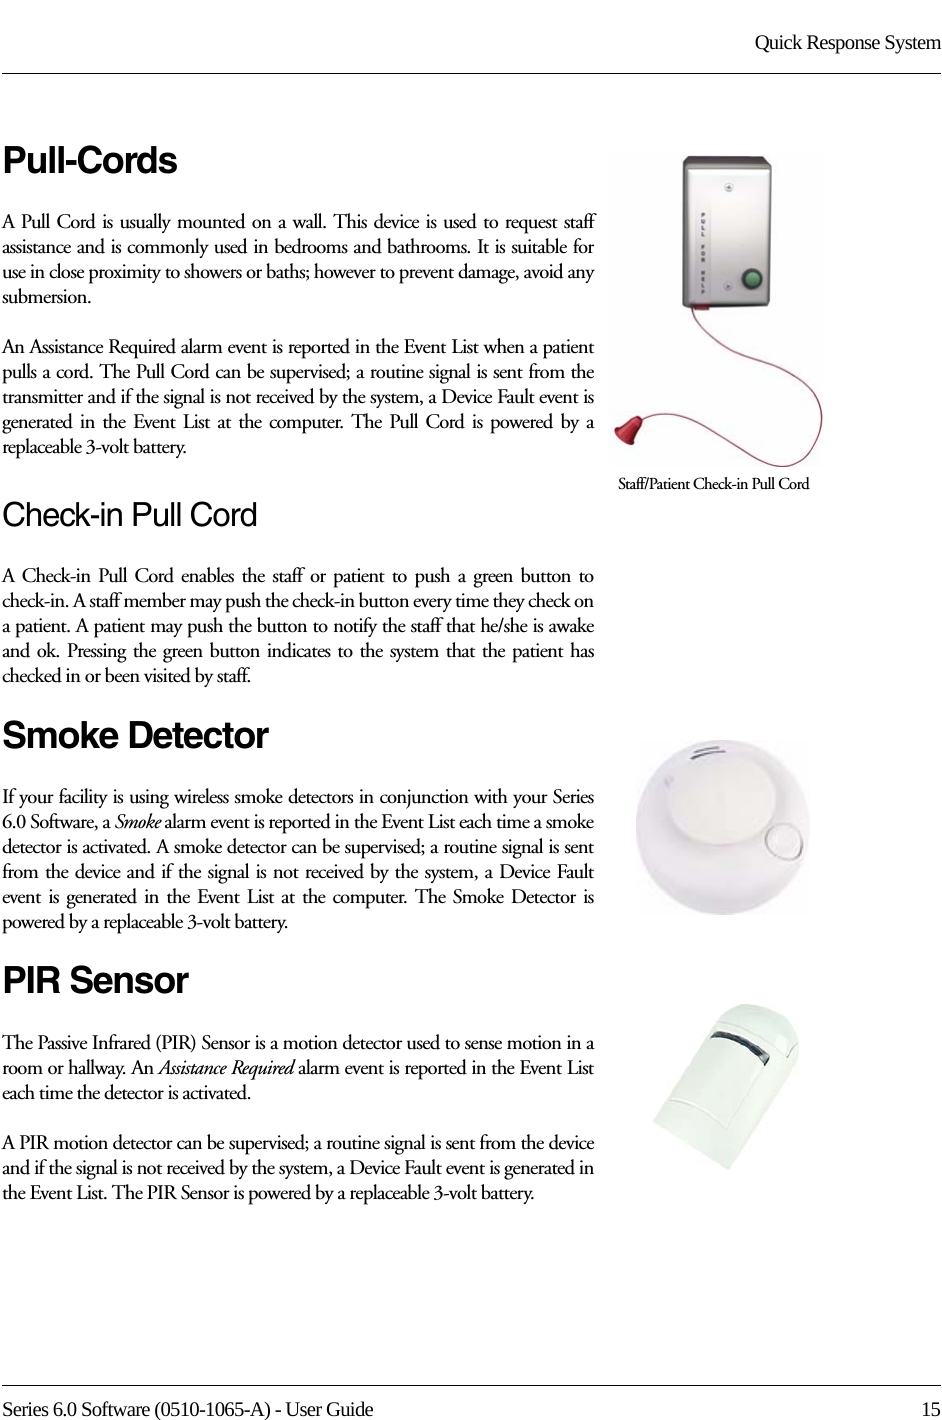 Series 6.0 Software (0510-1065-A) - User Guide  15Quick Response SystemPull-CordsA Pull Cord is usually mounted on a wall. This device is used to request staff assistance and is commonly used in bedrooms and bathrooms. It is suitable for use in close proximity to showers or baths; however to prevent damage, avoid any submersion.An Assistance Required alarm event is reported in the Event List when a patient pulls a cord. The Pull Cord can be supervised; a routine signal is sent from the transmitter and if the signal is not received by the system, a Device Fault event is generated in the Event List at the computer. The Pull Cord is powered by a replaceable 3-volt battery. Check-in Pull CordA Check-in Pull Cord enables the staff or patient to push a green button to check-in. A staff member may push the check-in button every time they check on a patient. A patient may push the button to notify the staff that he/she is awake and ok. Pressing the green button indicates to the system that the patient has checked in or been visited by staff.Smoke DetectorIf your facility is using wireless smoke detectors in conjunction with your Series 6.0 Software, a Smoke alarm event is reported in the Event List each time a smoke detector is activated. A smoke detector can be supervised; a routine signal is sent from the device and if the signal is not received by the system, a Device Fault event is generated in the Event List at the computer. The Smoke Detector is powered by a replaceable 3-volt battery.PIR SensorThe Passive Infrared (PIR) Sensor is a motion detector used to sense motion in a room or hallway. An Assistance Required alarm event is reported in the Event List each time the detector is activated. A PIR motion detector can be supervised; a routine signal is sent from the device and if the signal is not received by the system, a Device Fault event is generated in the Event List. The PIR Sensor is powered by a replaceable 3-volt battery.Staff/Patient Check-in Pull Cord